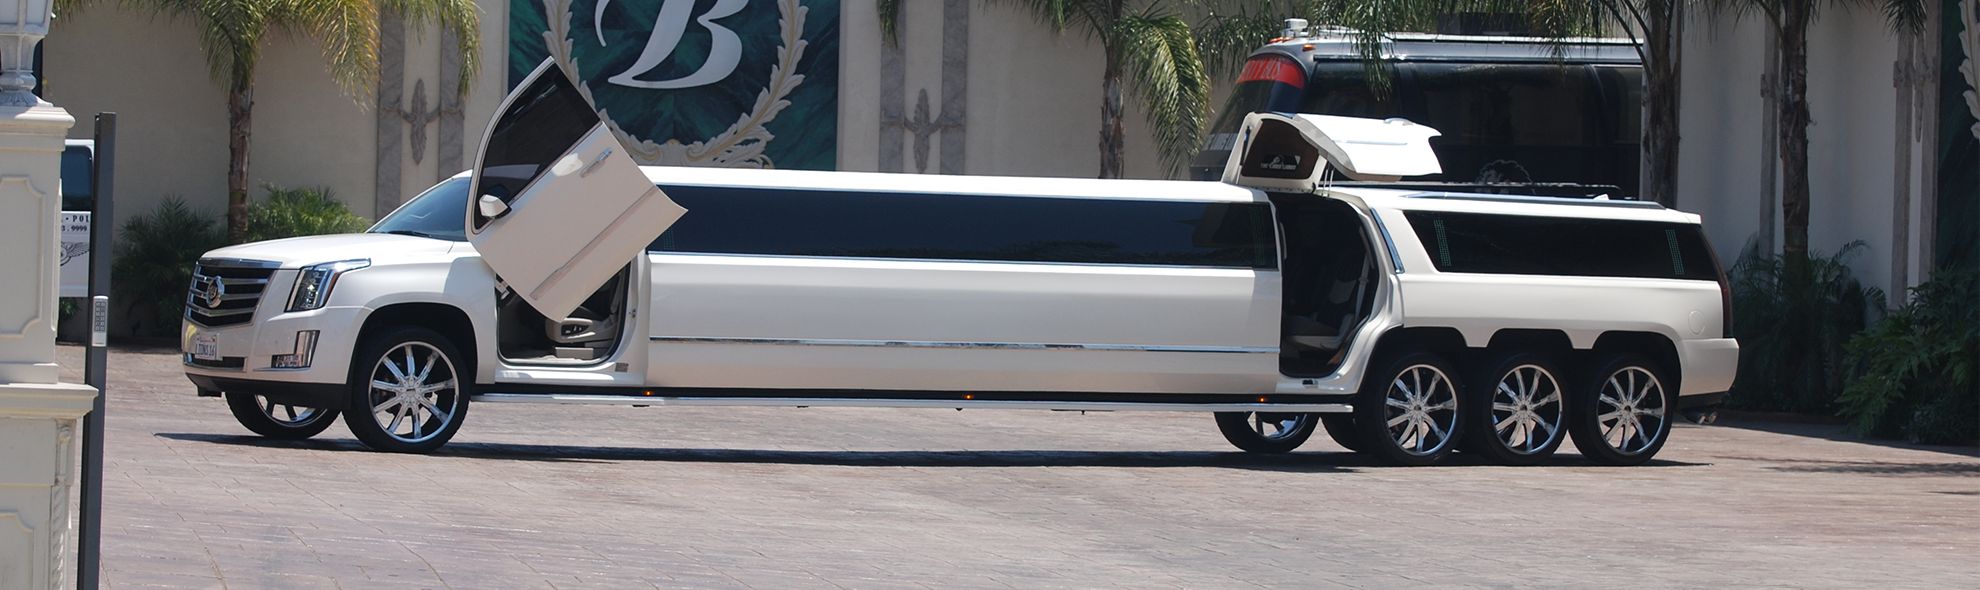 Limo Service in Los Angeles